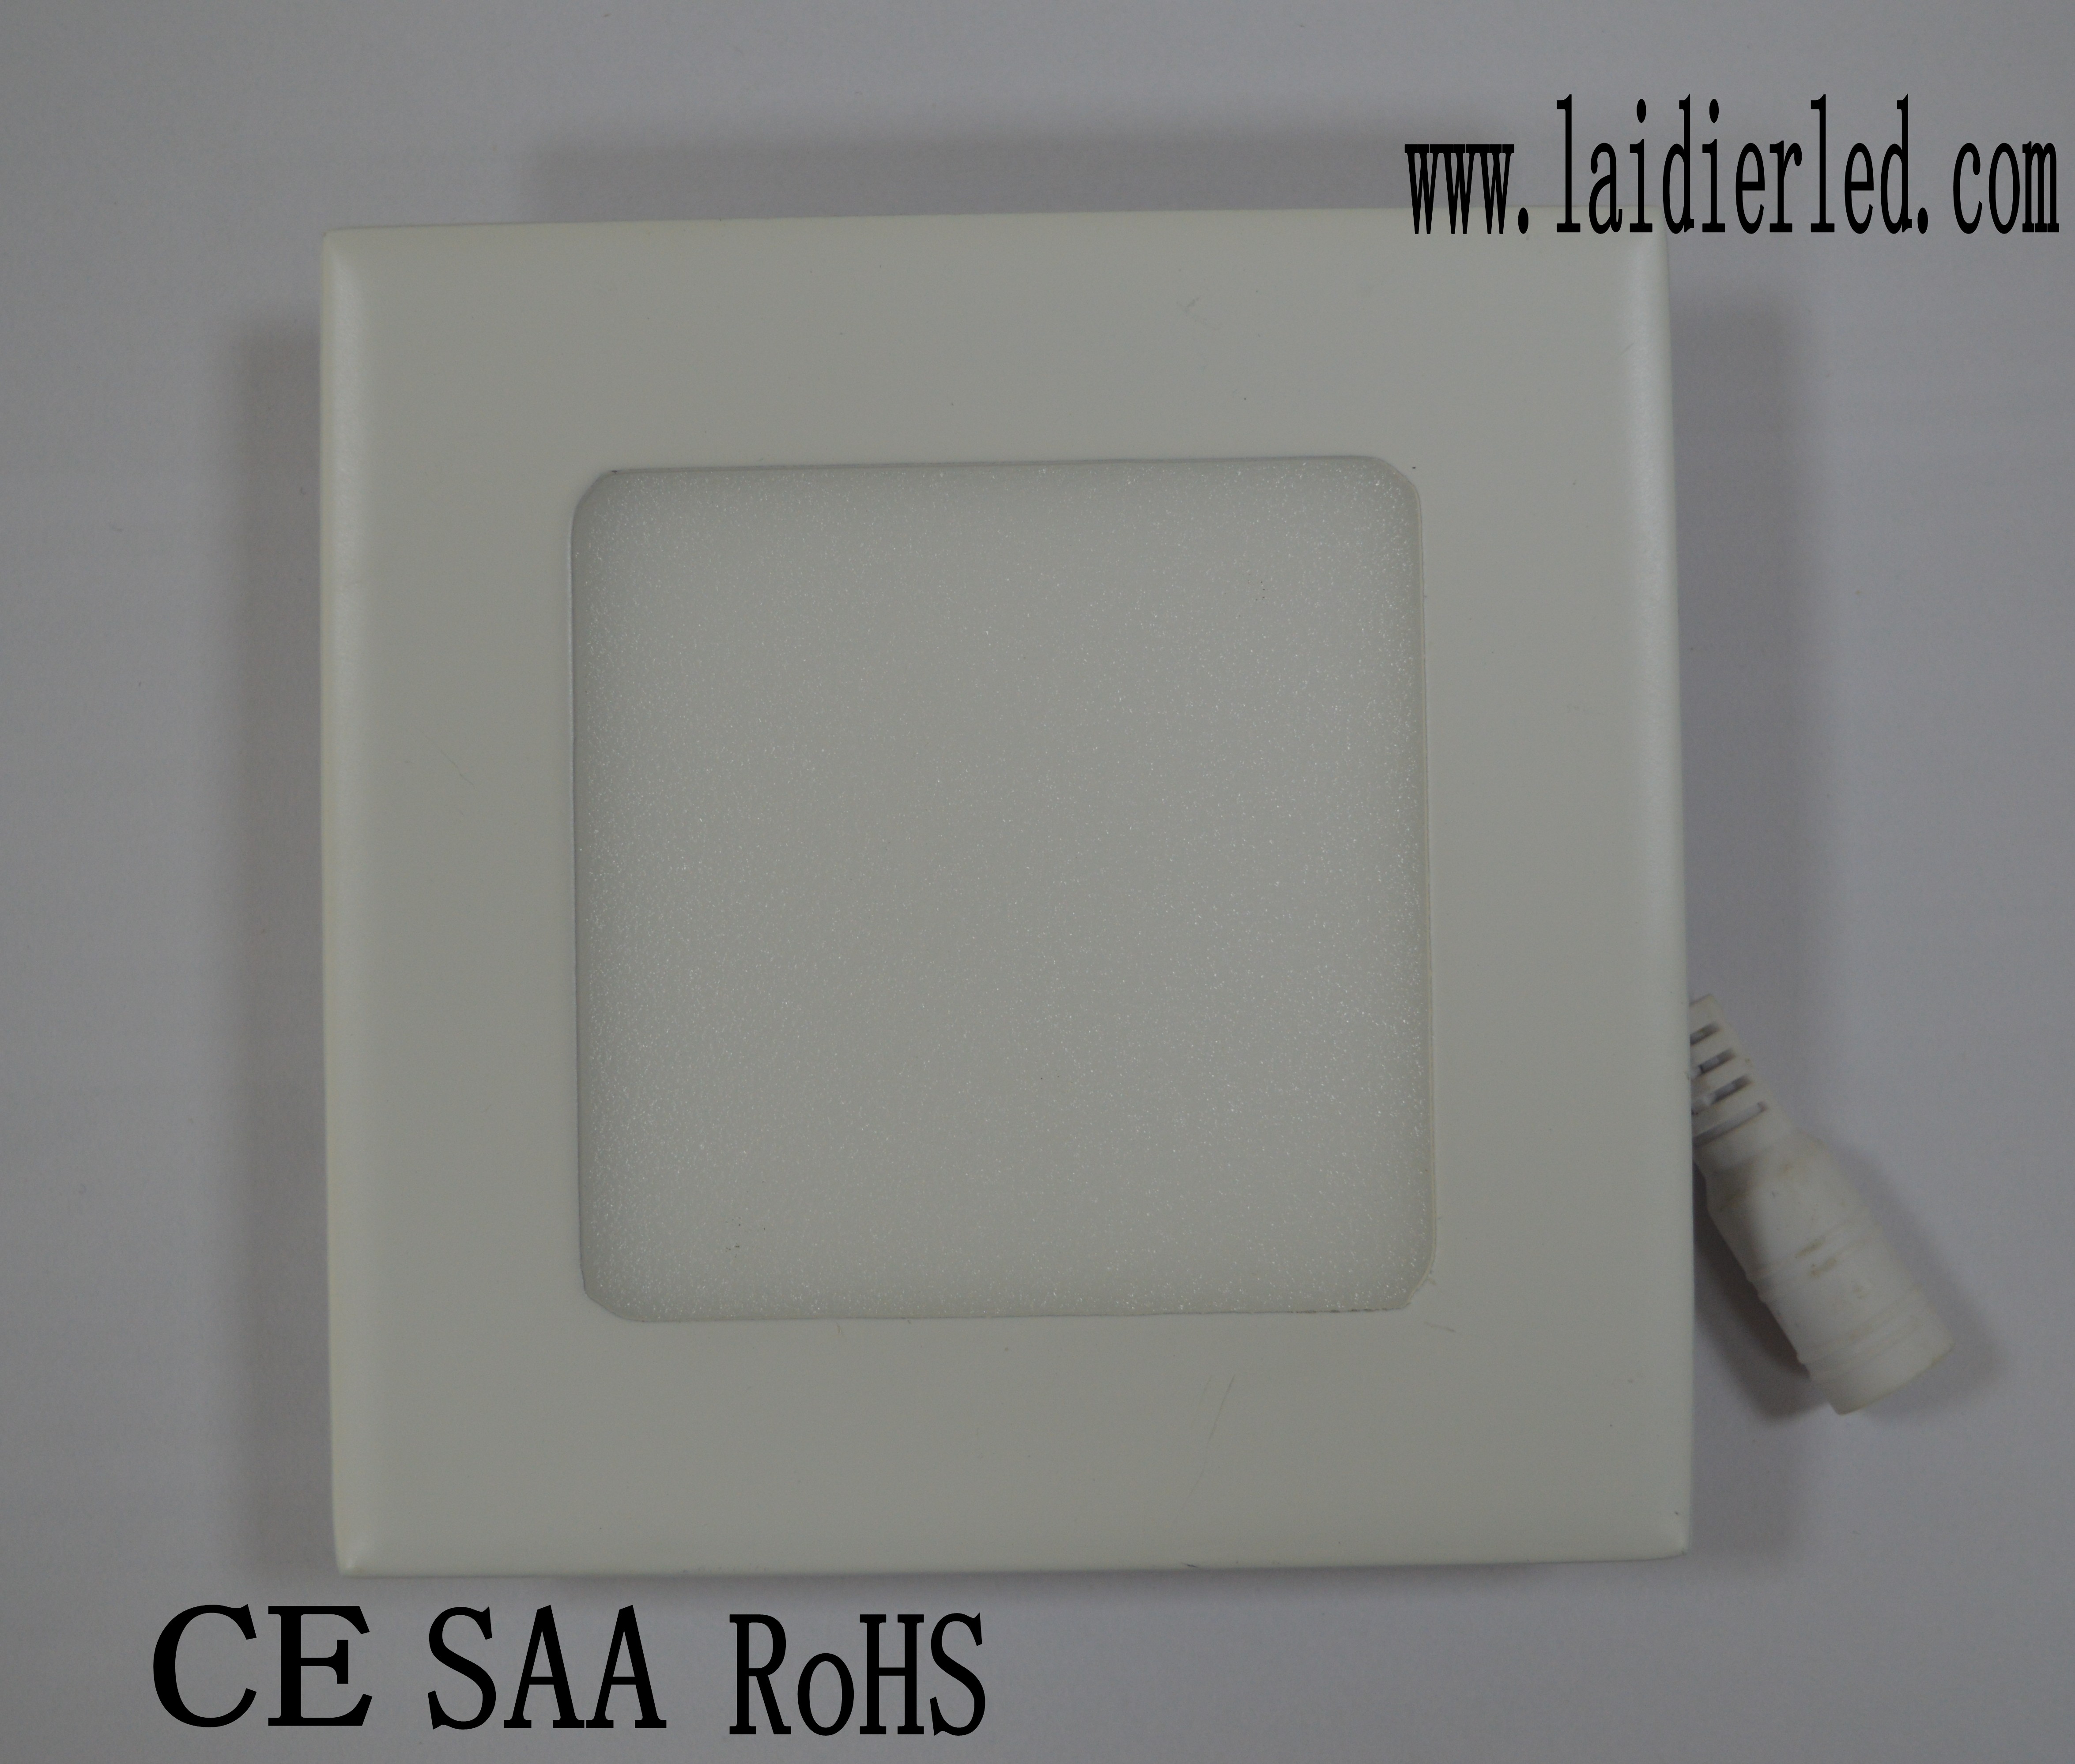 Hot sale high quality LED Panel Light LED 4W SMD2835 2years warranty